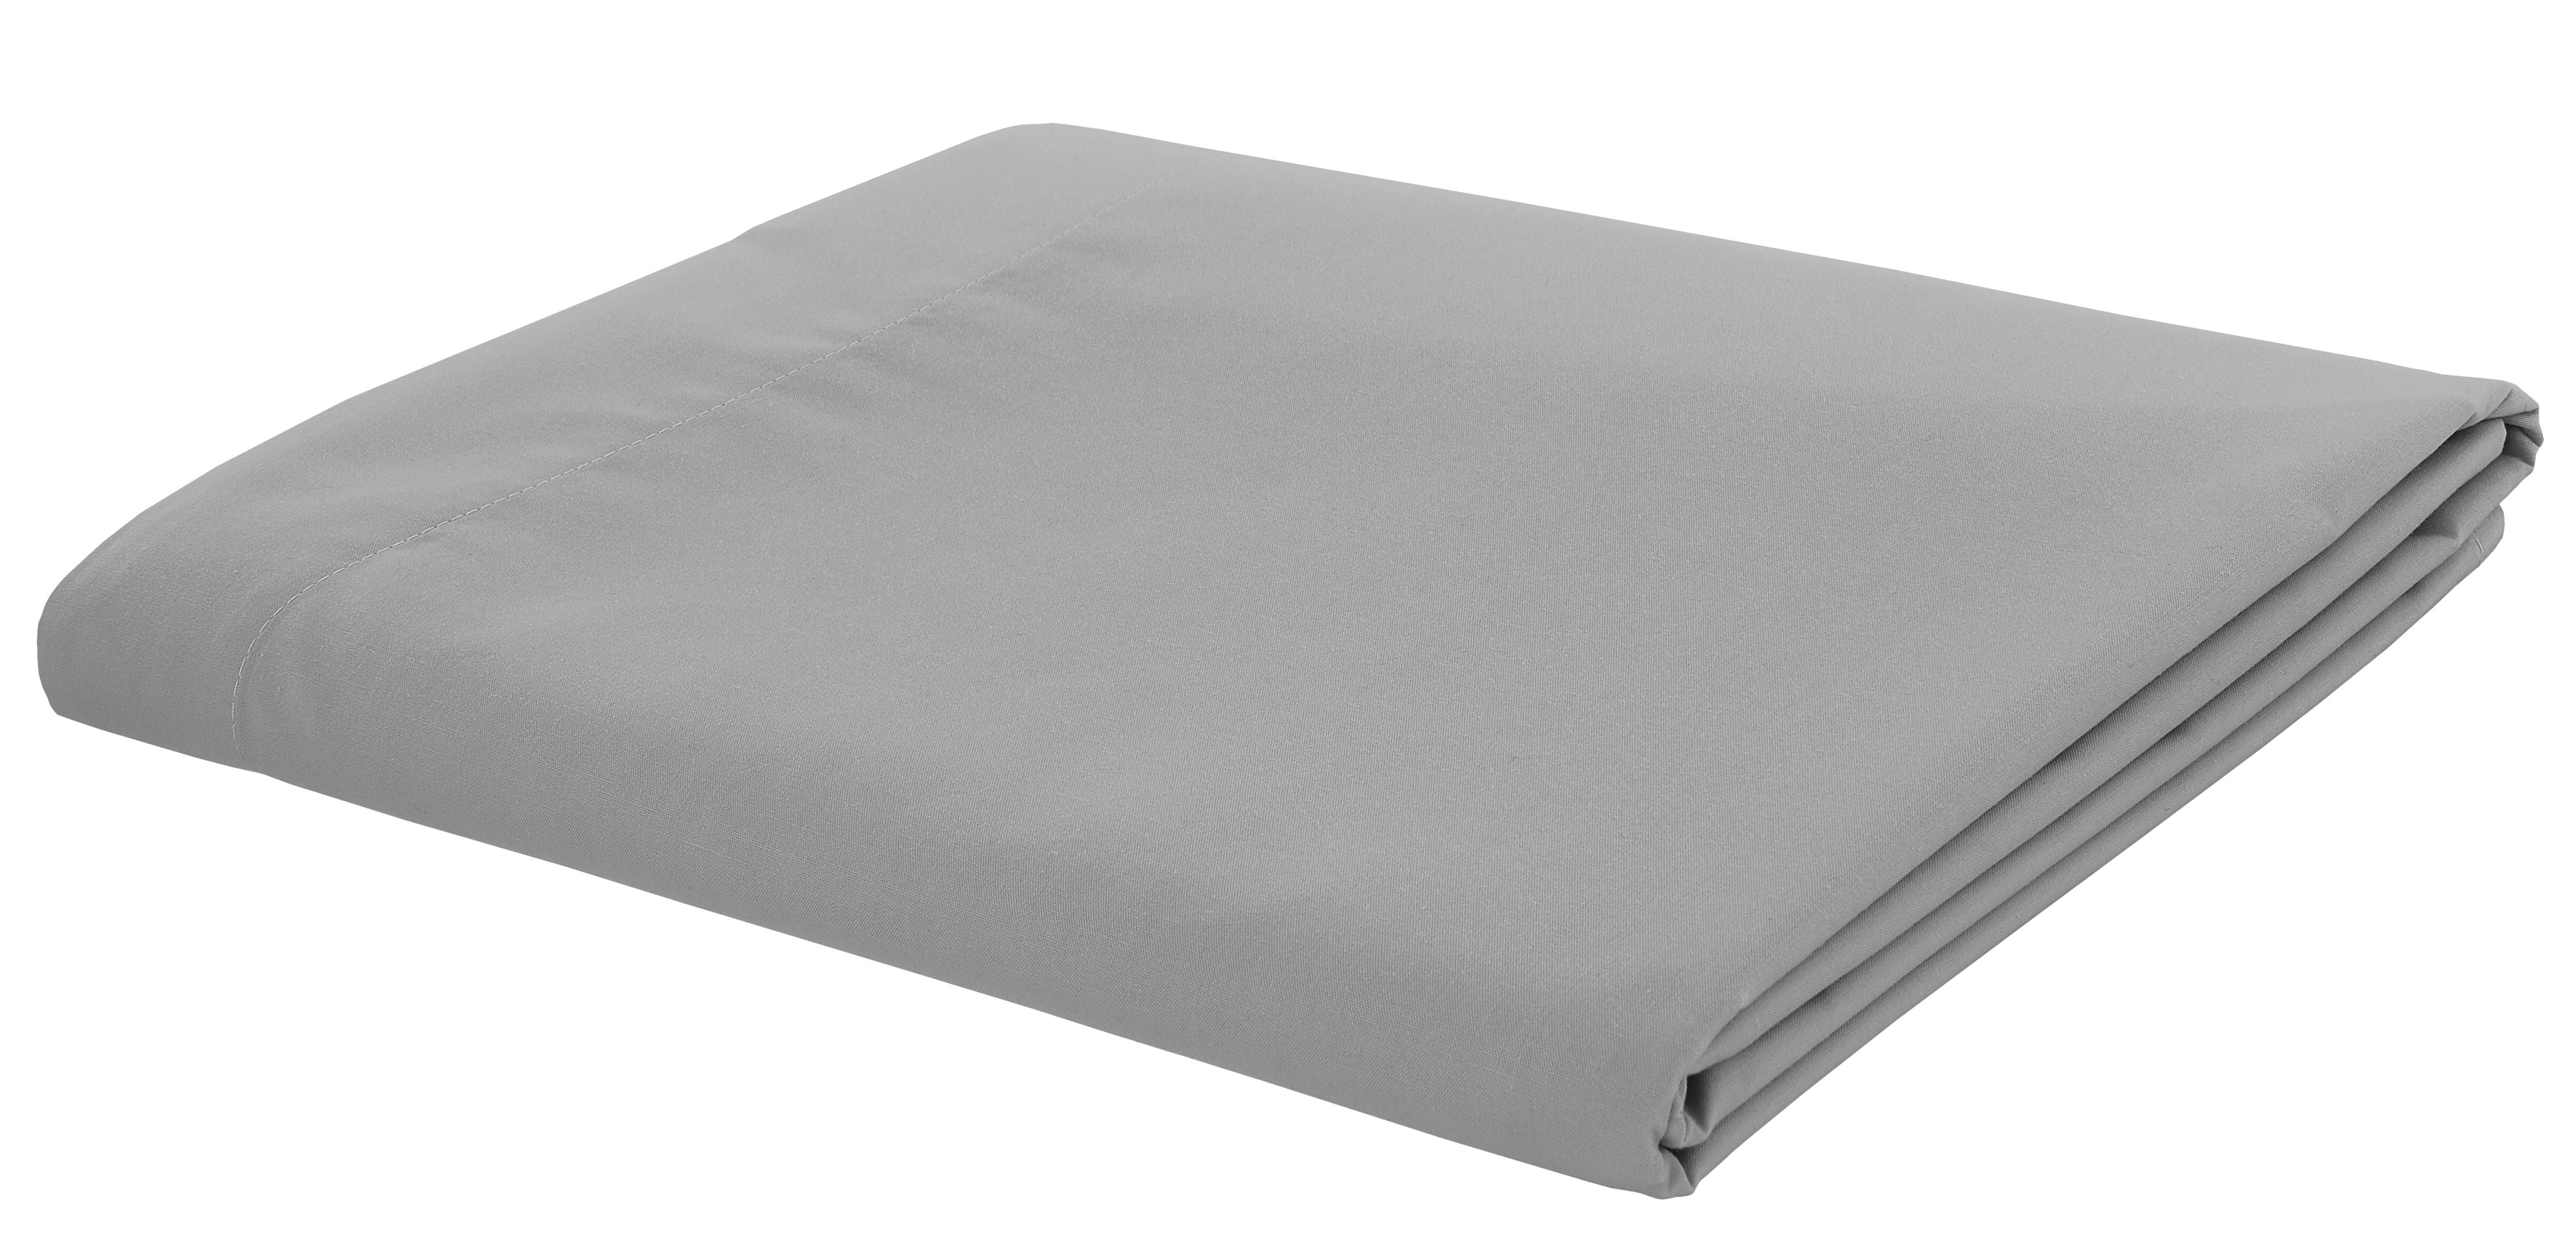 Catherine Lansfield Combed Percale Non-Iron Sheeting, Grey